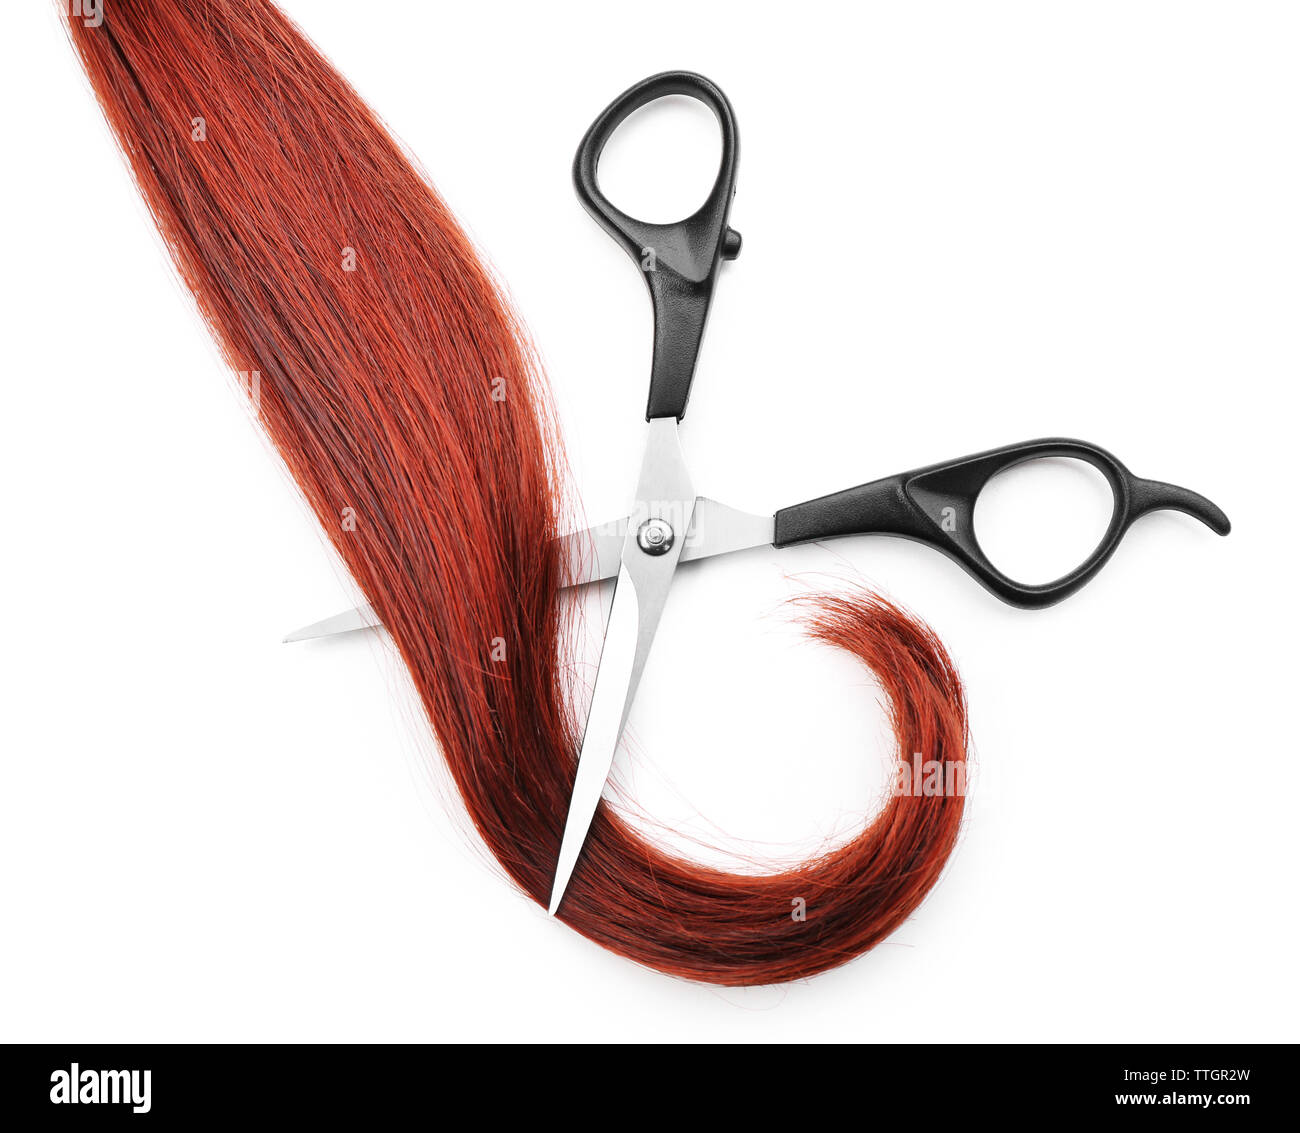 Hairdresser's scissors with strand of red hair, isolated on white Stock Photo